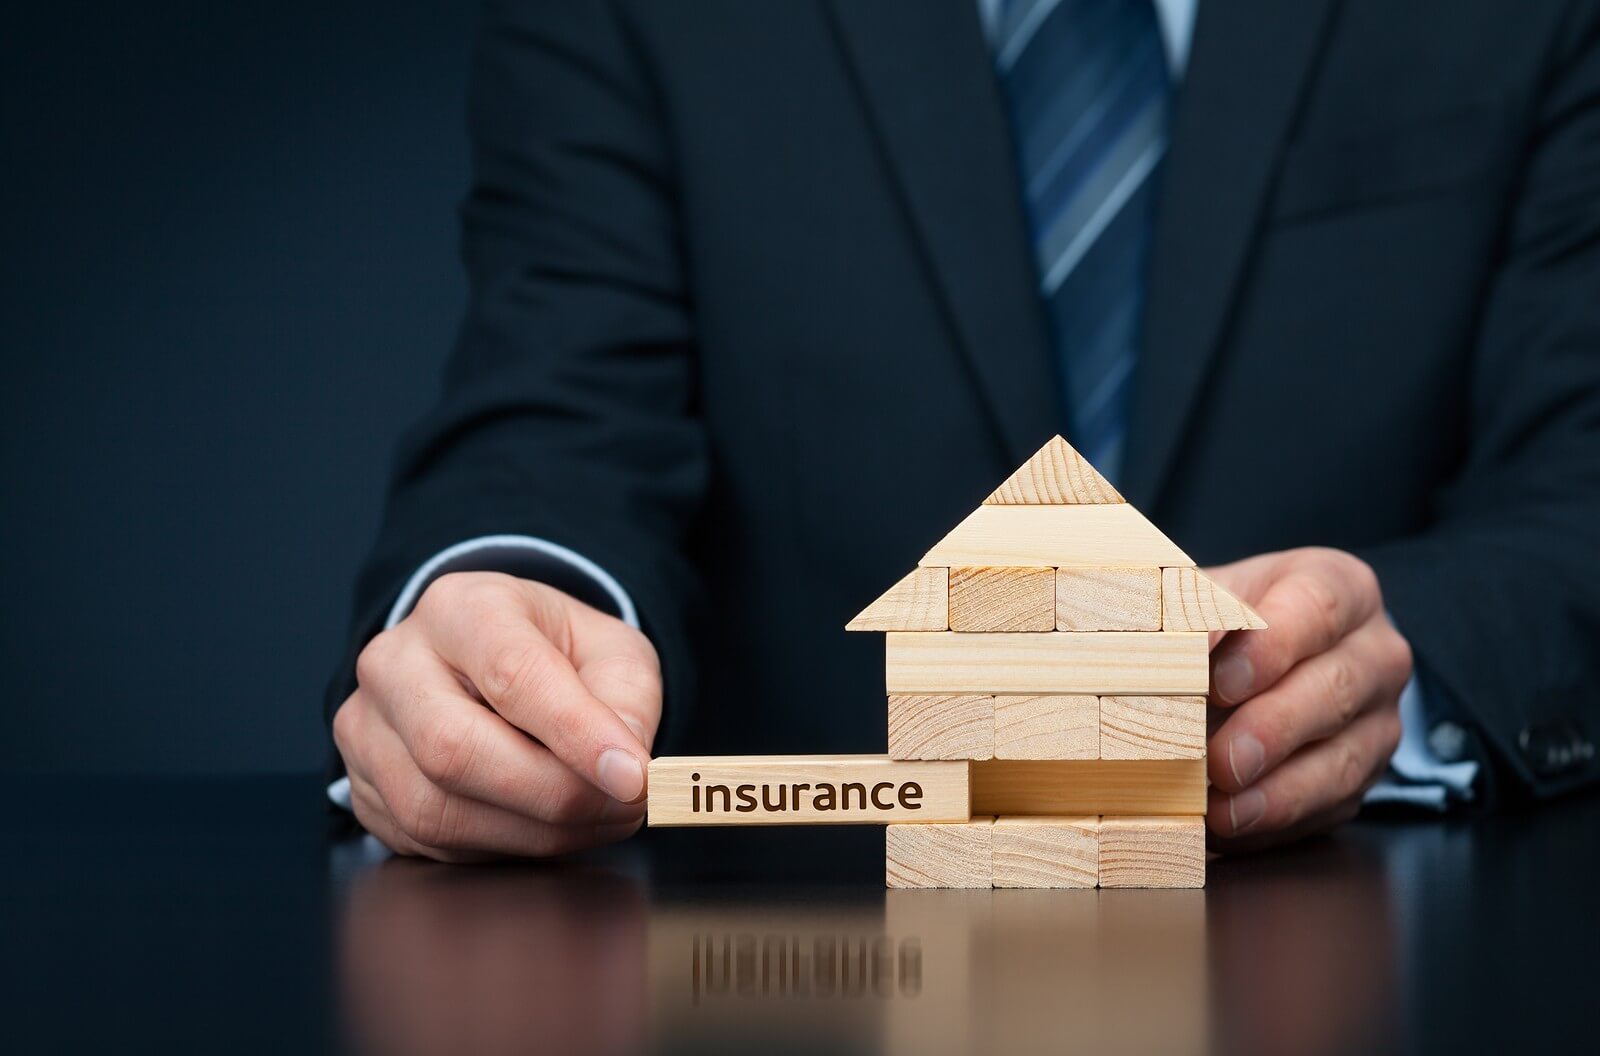 Things to Note before Opting Home Insurance